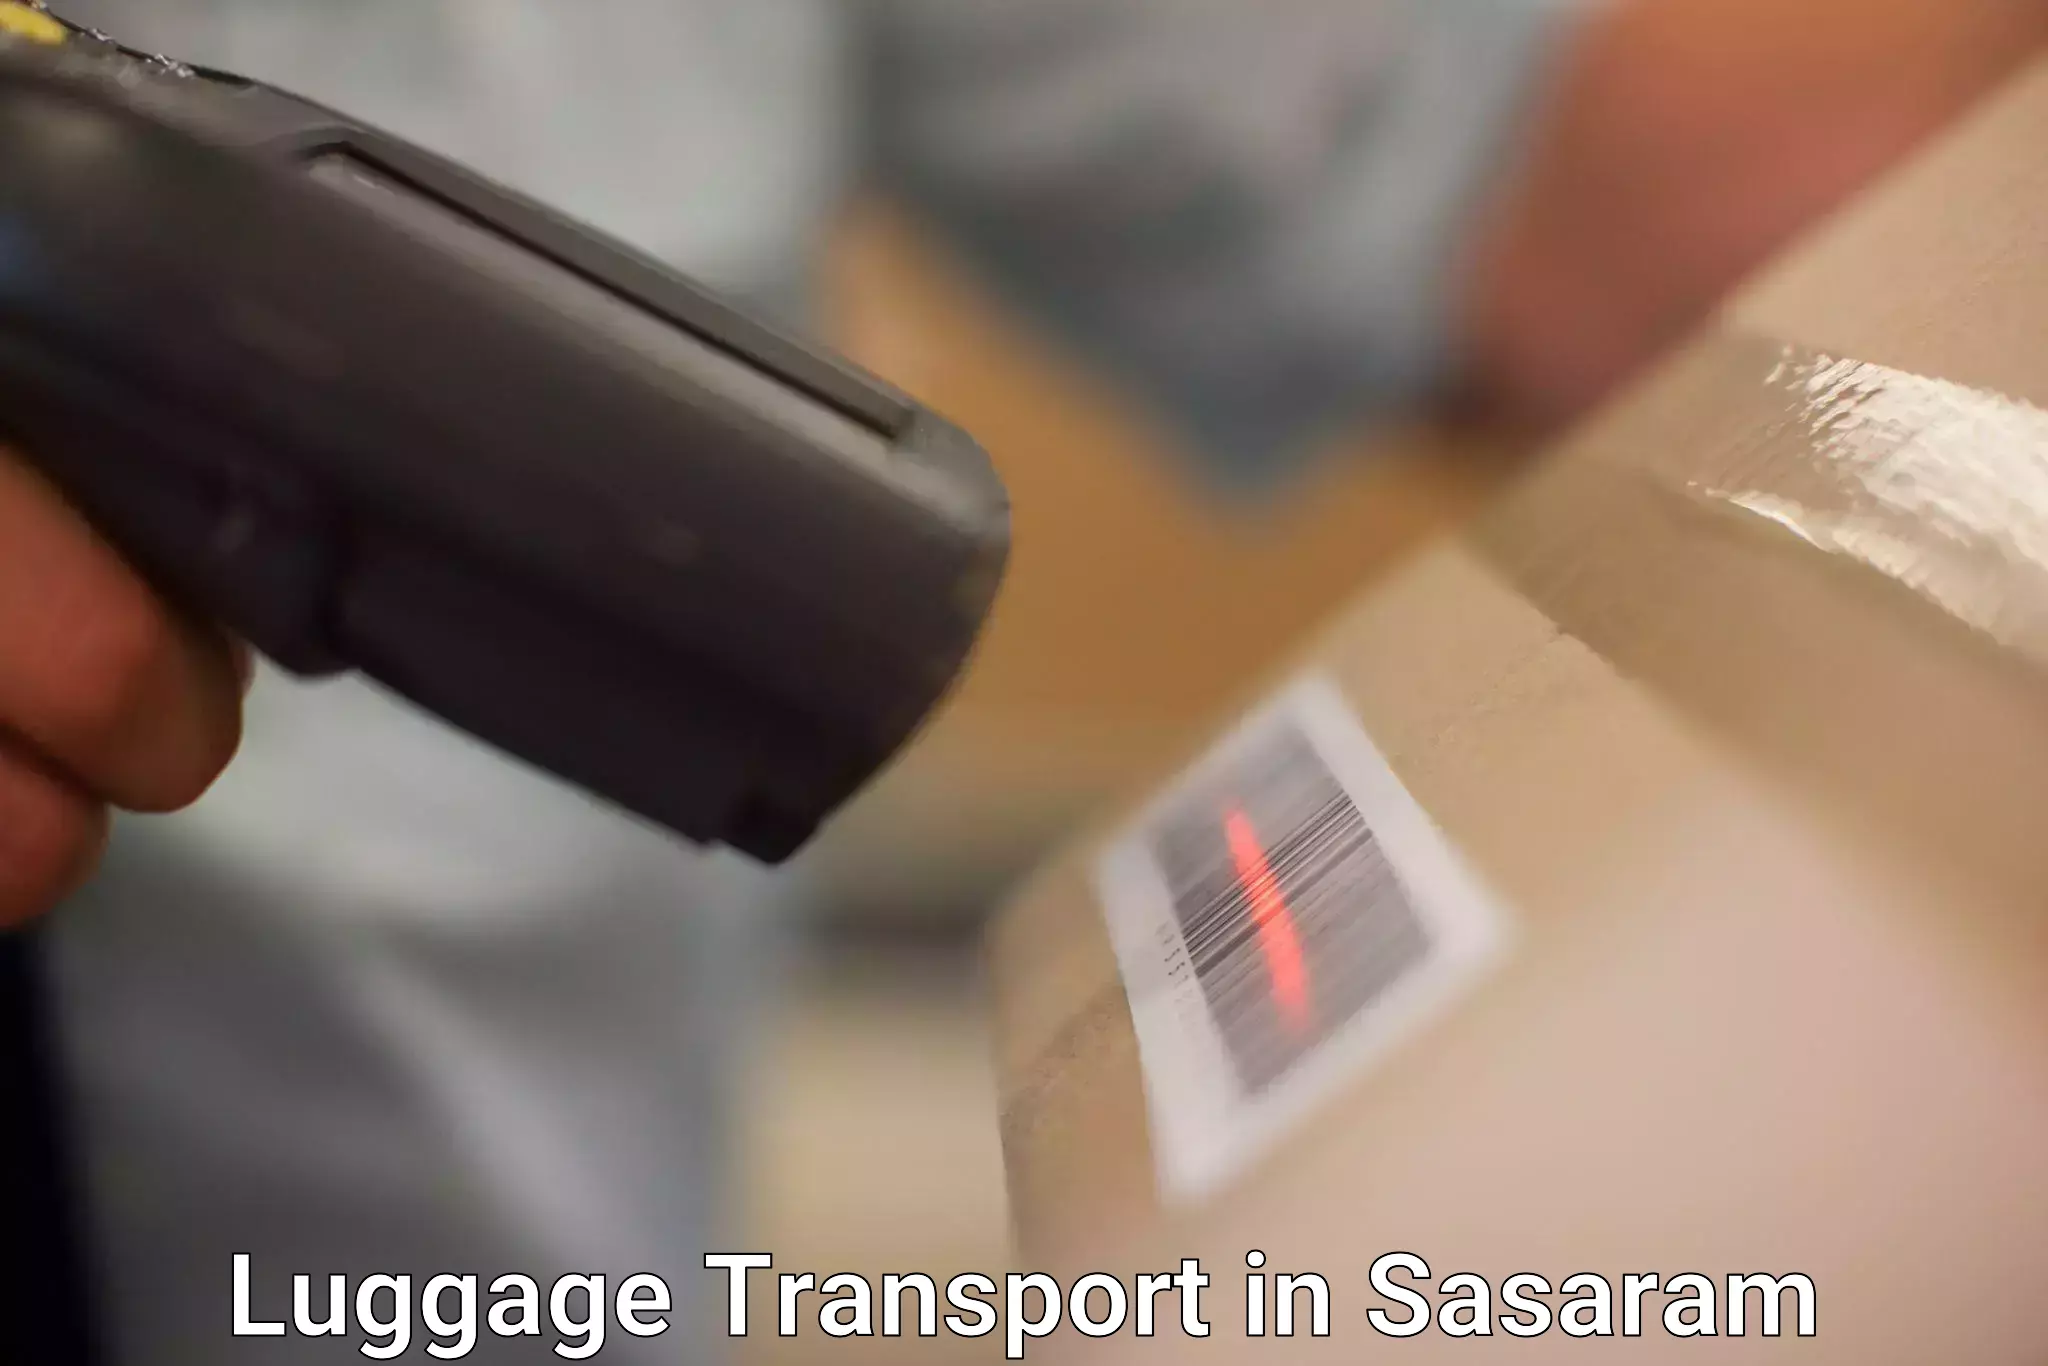 Luggage dispatch service in Sasaram